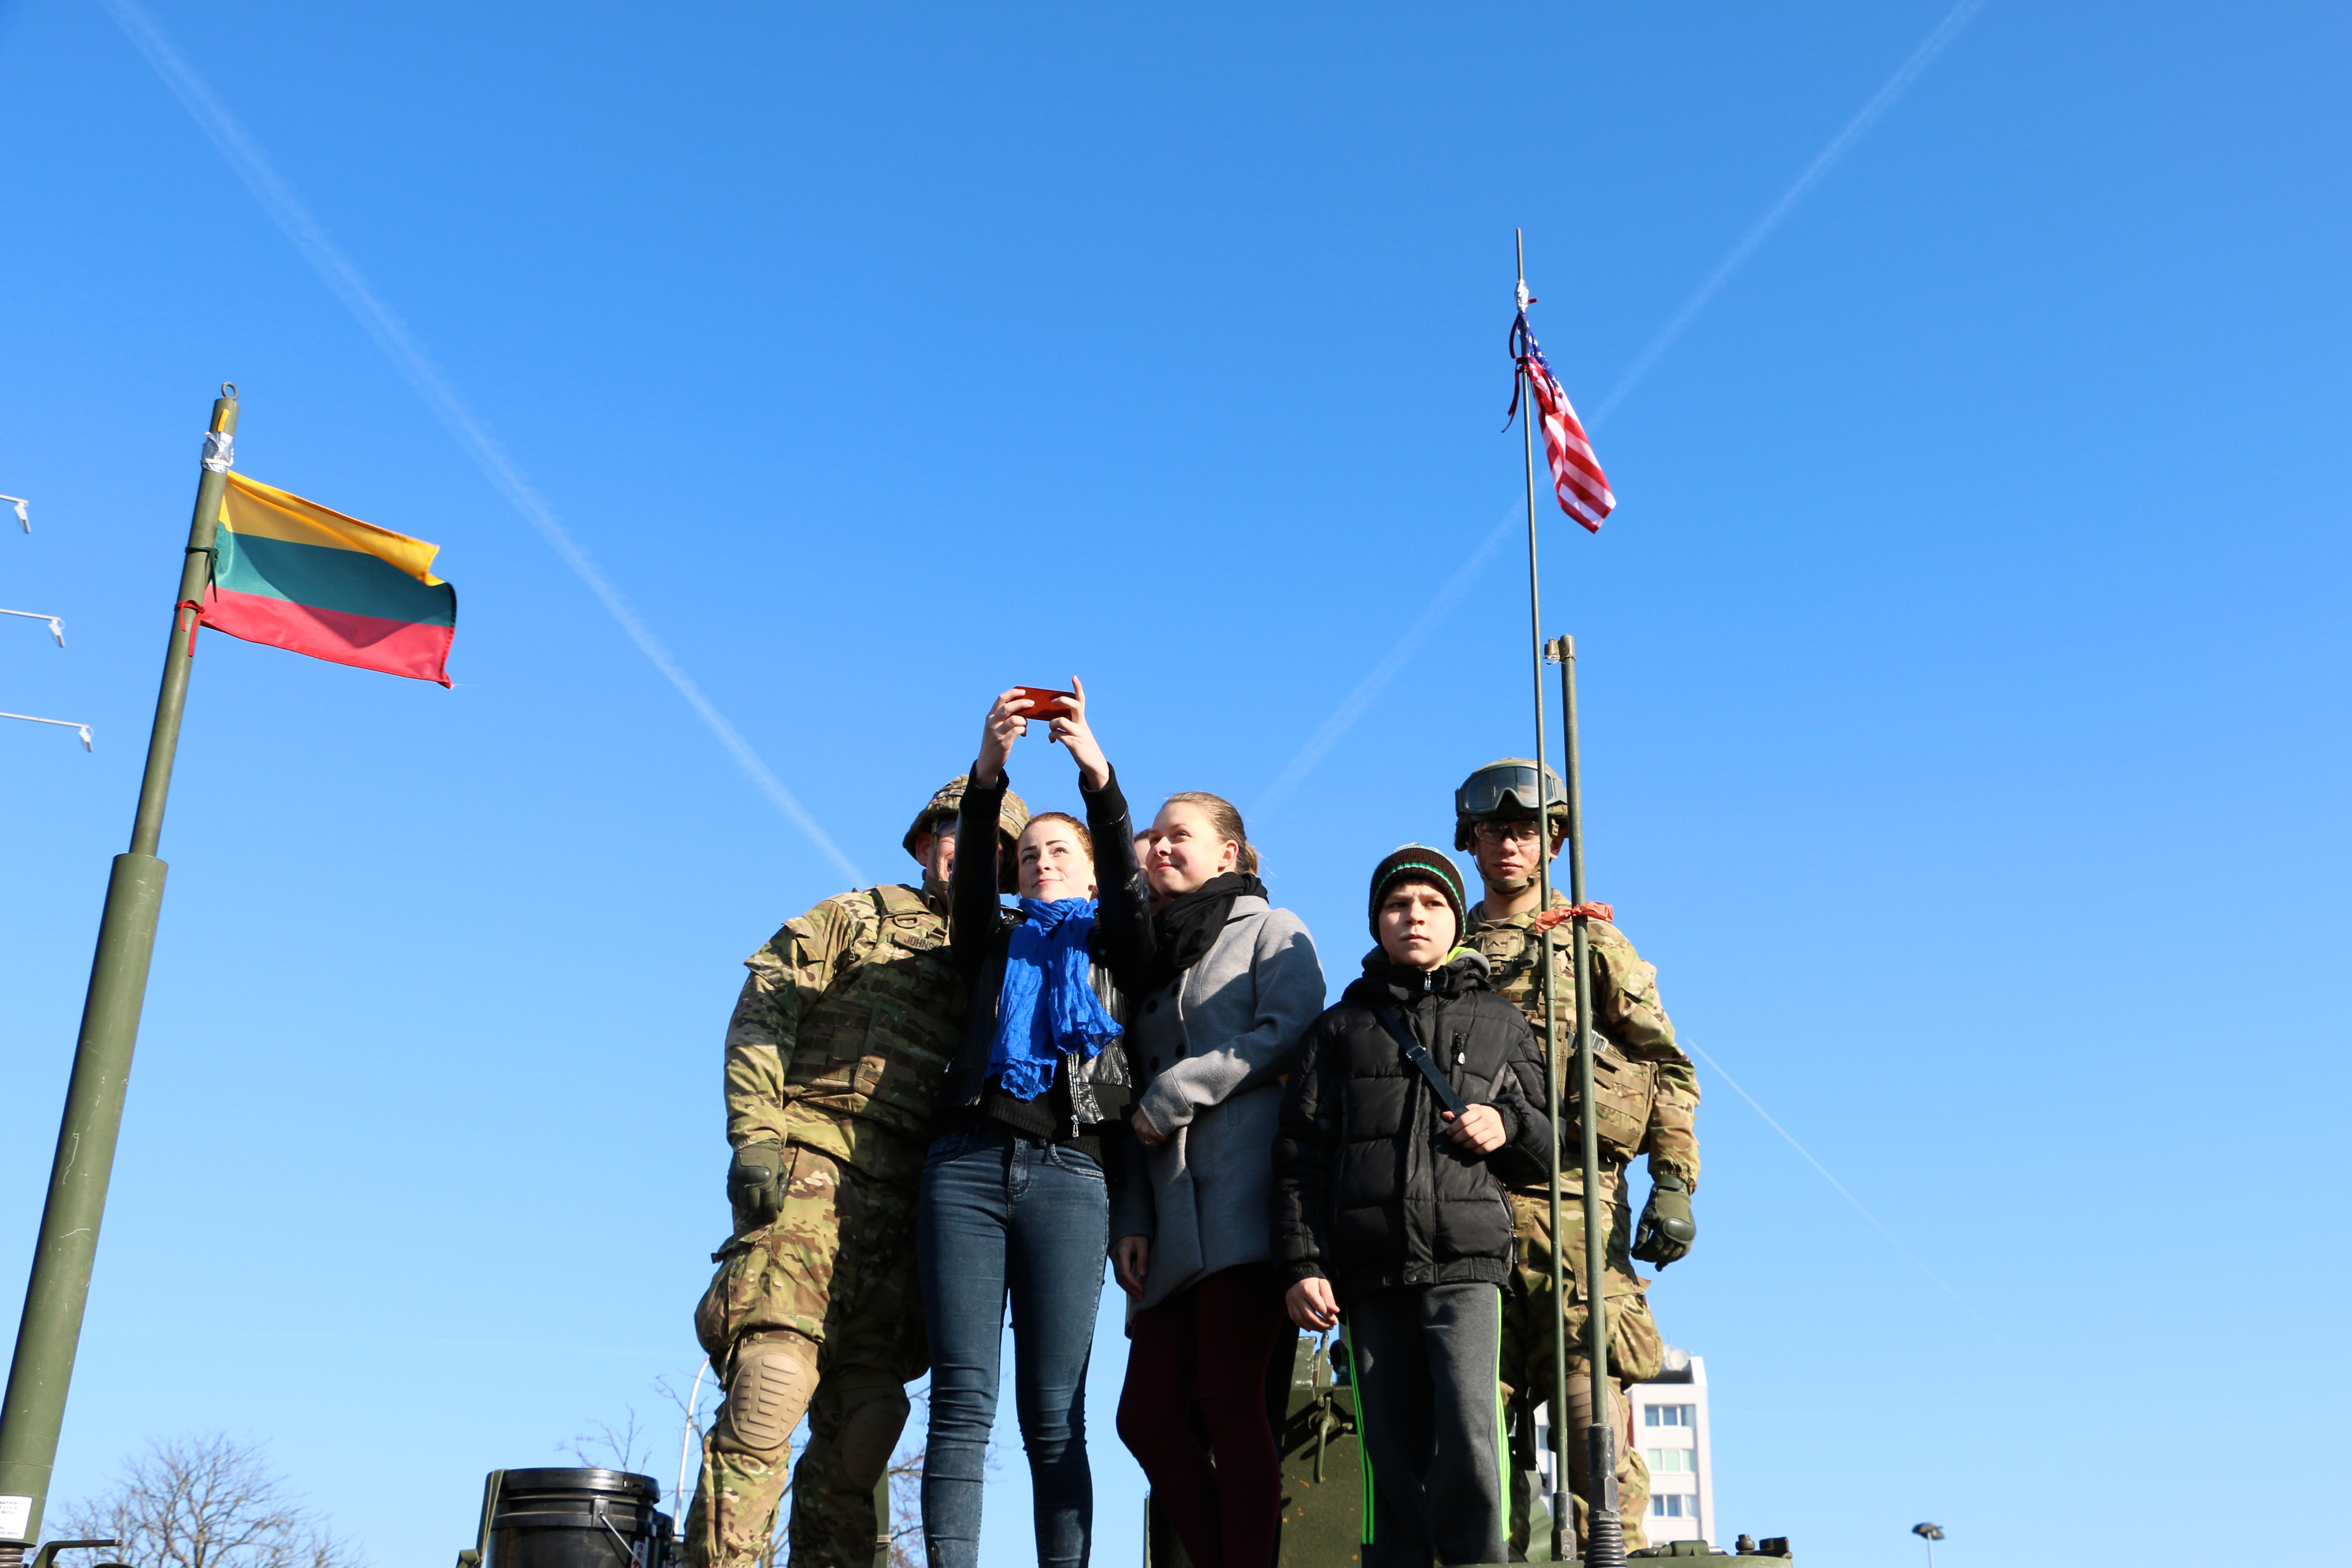 Lithuanians pose with U.S. Army soldiers at a U.S. Army Stryker static display in Marijampole, Lithuania on March 24.(Photo: Nolan Peterson/The Daily Signal)